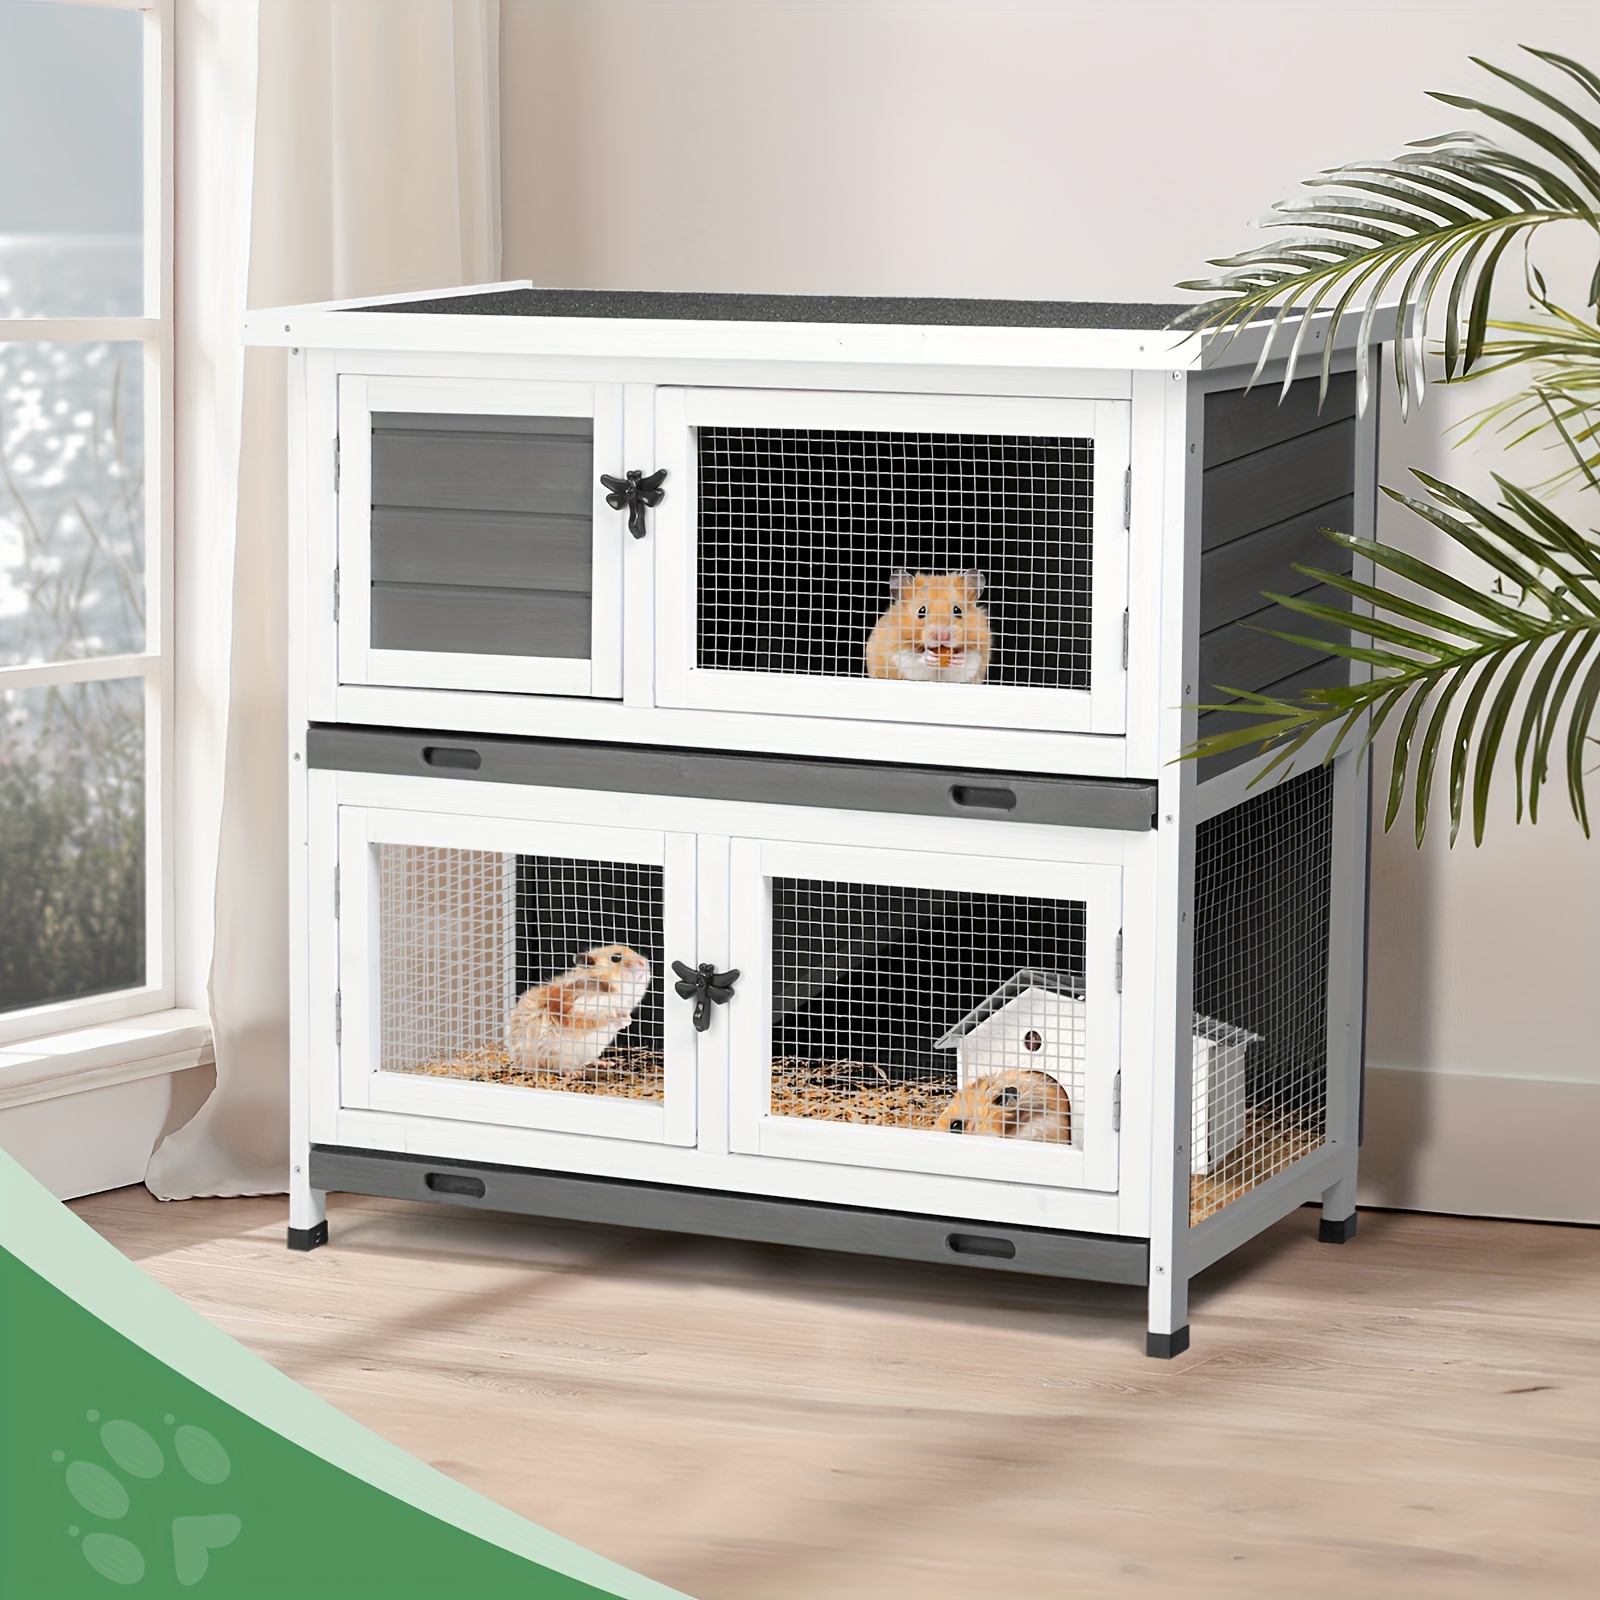 2 story solid wood rabbit hutch bunny cage with 2 large main rooms indoor outdoor rabbit house guinea pig cage pet house for small animals with 2 removable trays grey white